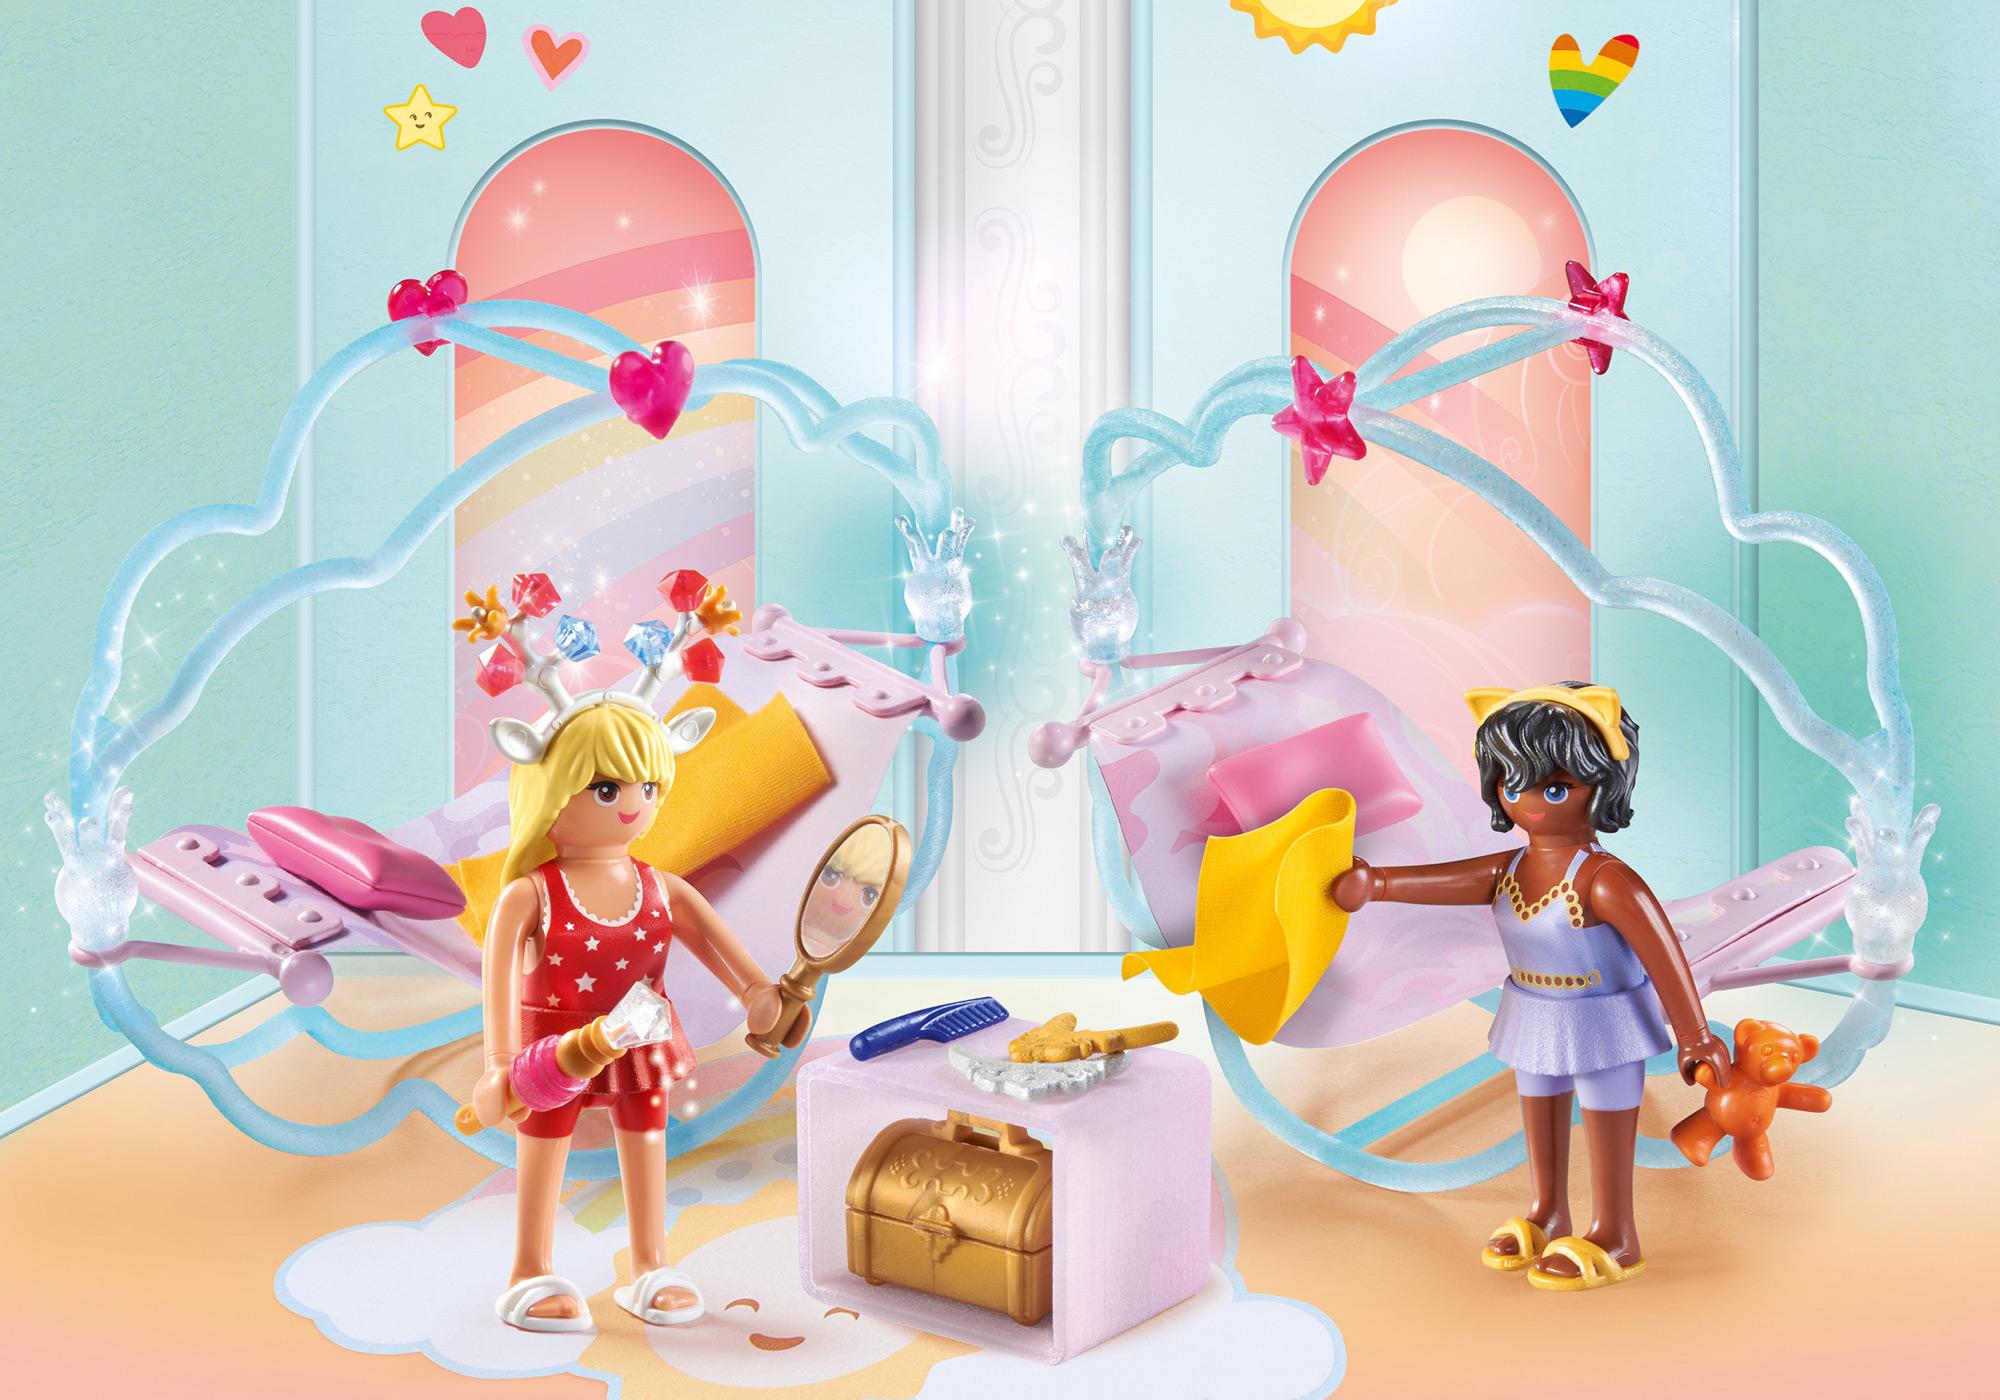 Playmobil Princess Magic: Baby Room in the Clouds 71360